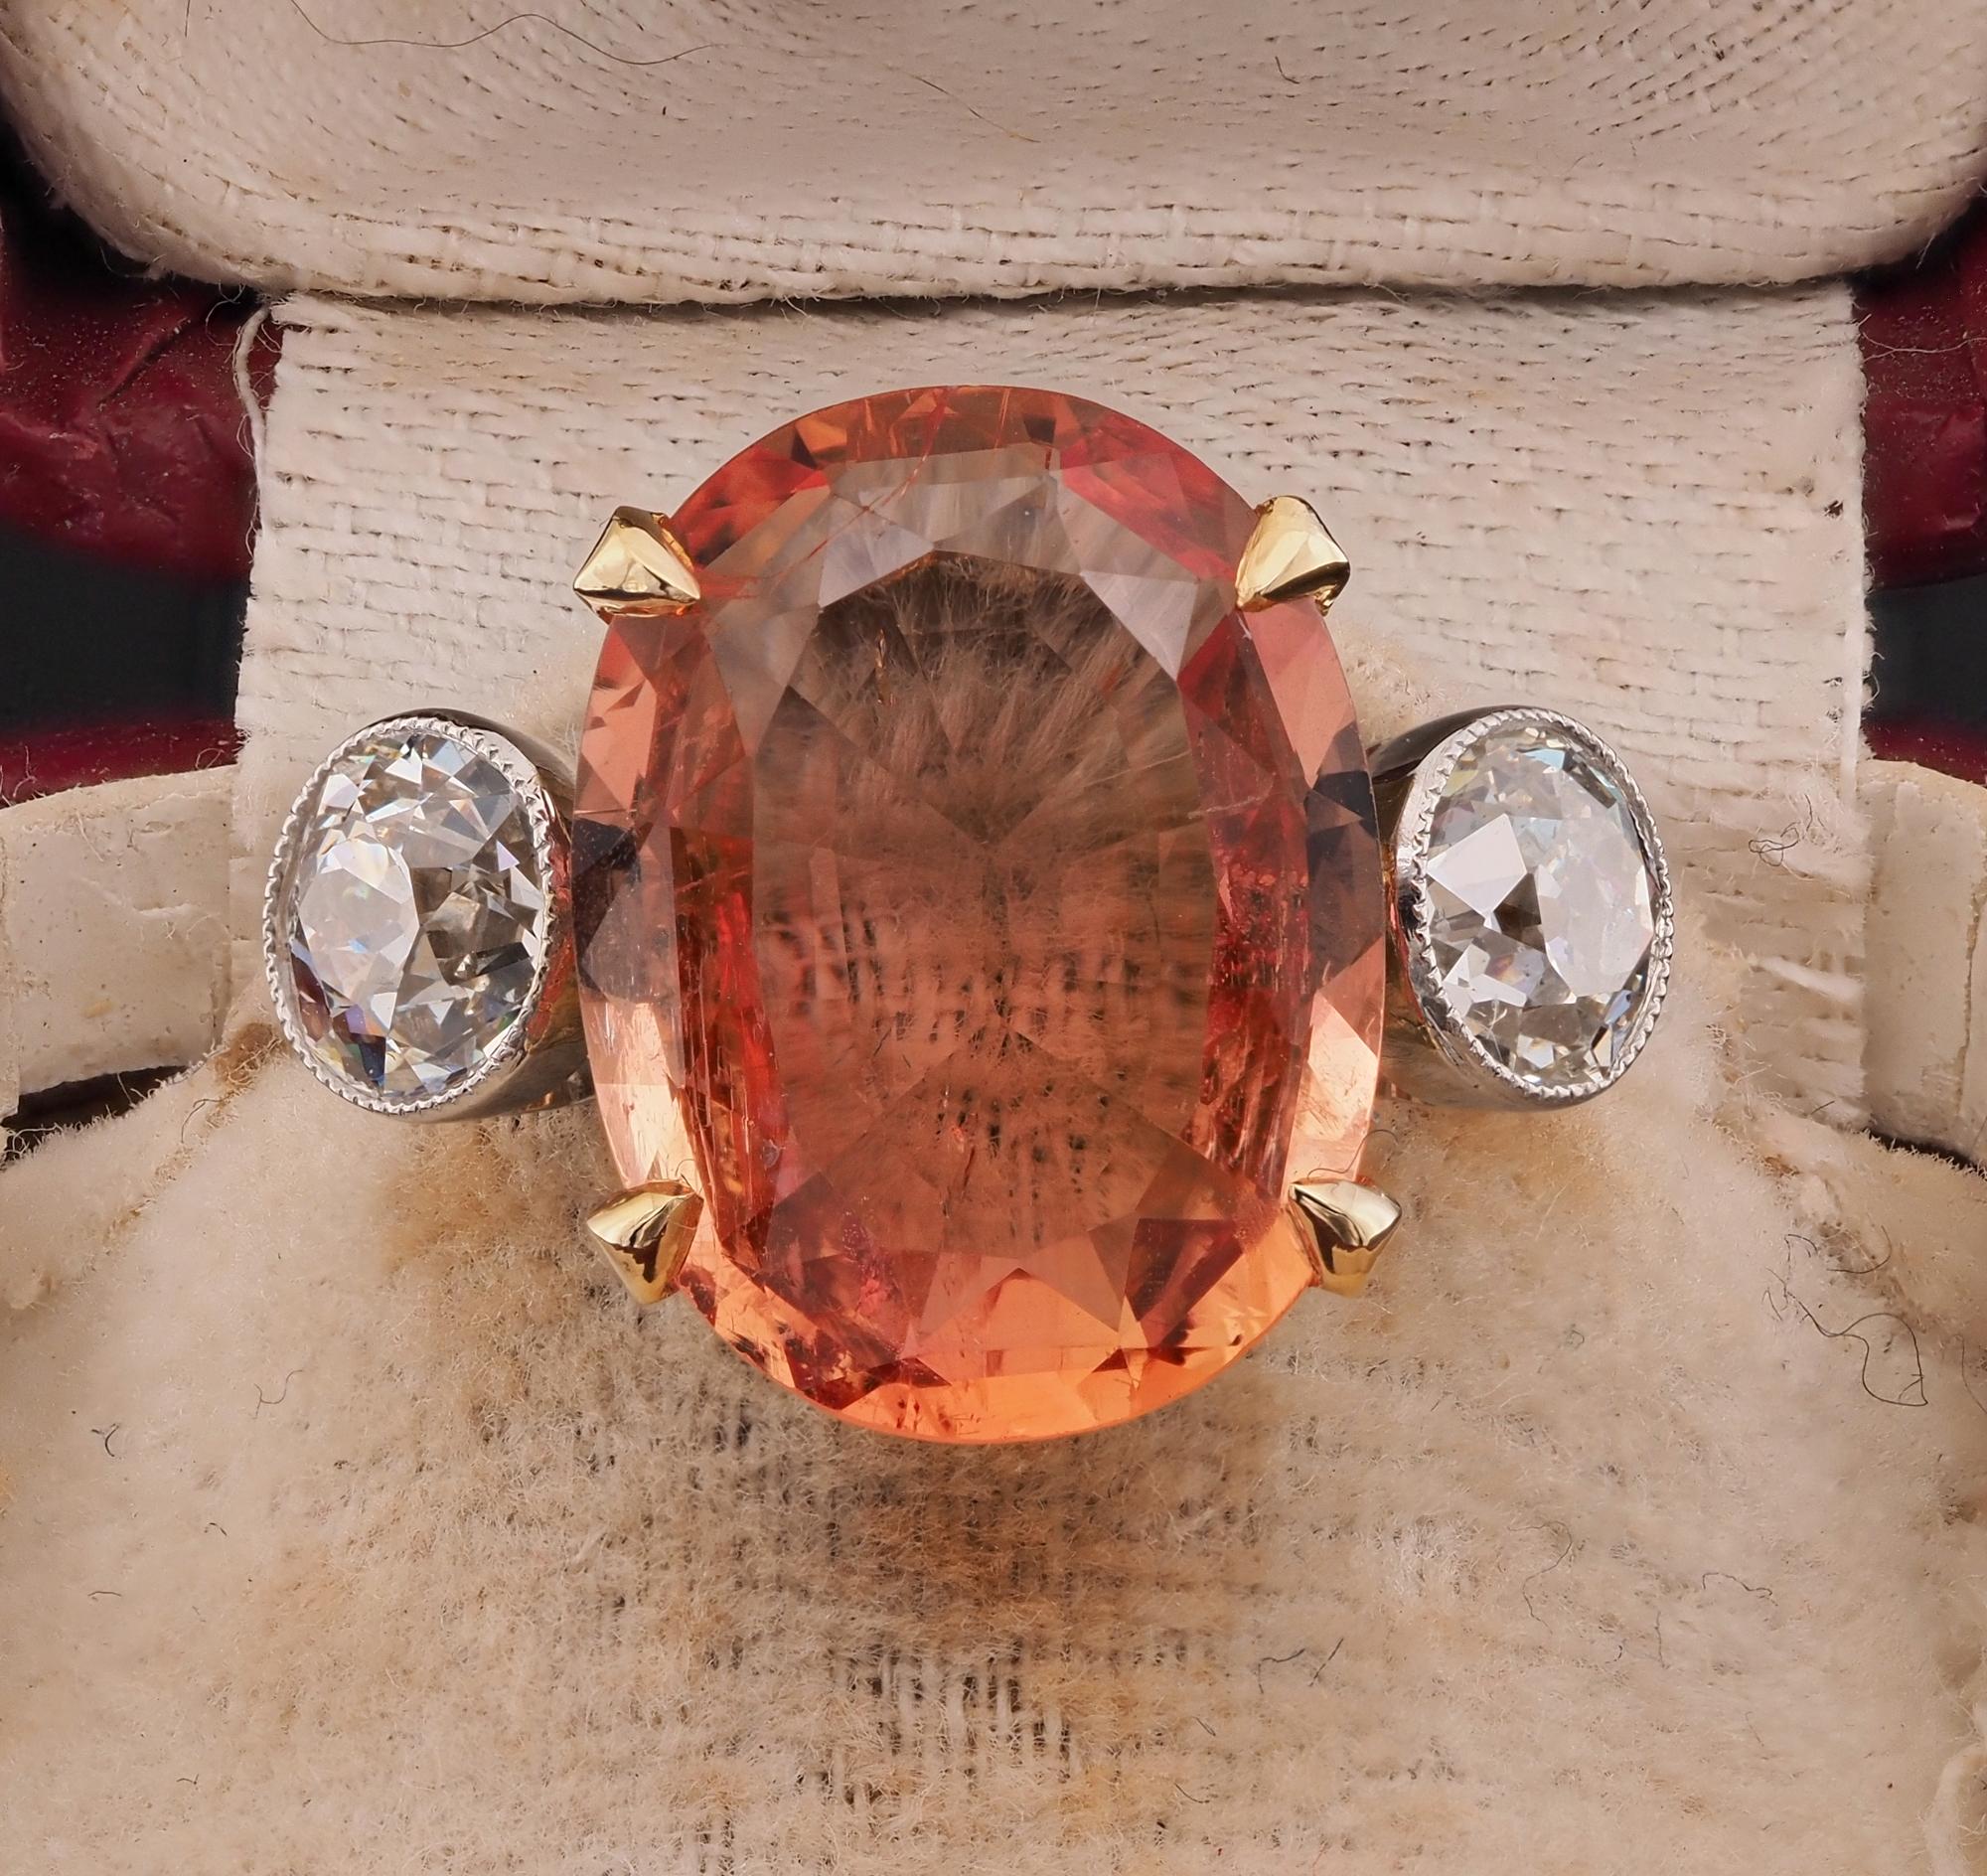 Rare Find
Imperial Topaz is also known as “precious Topaz”. It is the most sought after in the Topaz family, considered to be the color of the setting sun, imperial topaz gets its name from the Russian tsars of the 17th century
Imperial topaz colour